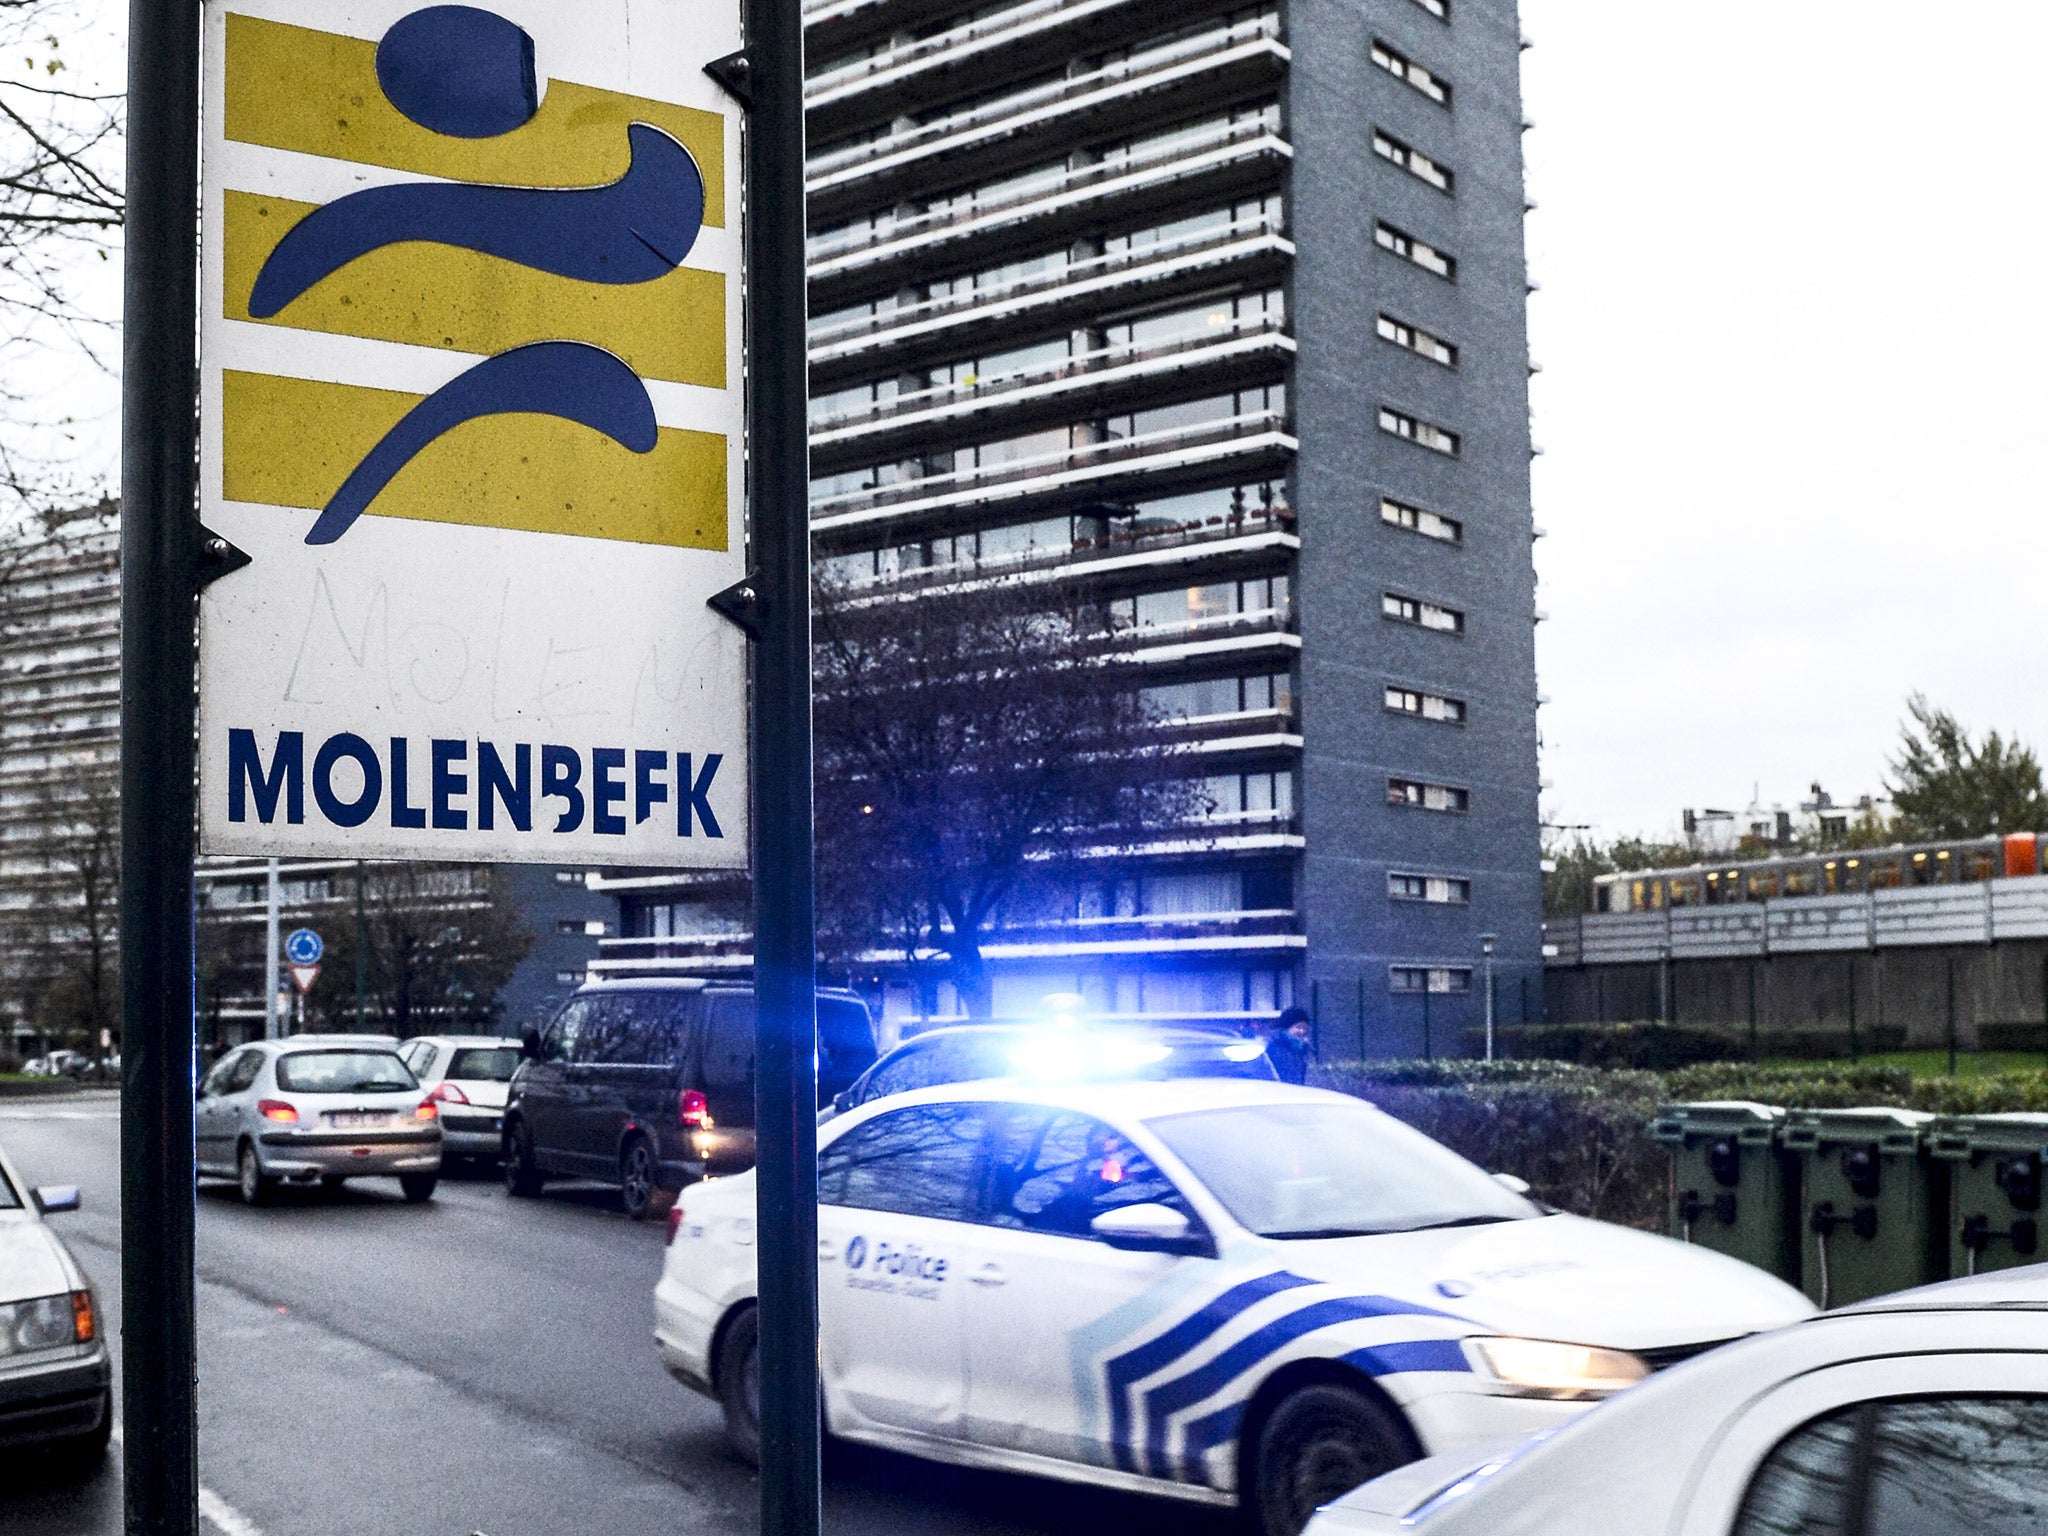 The district of Molenbeek has a population of 90,000